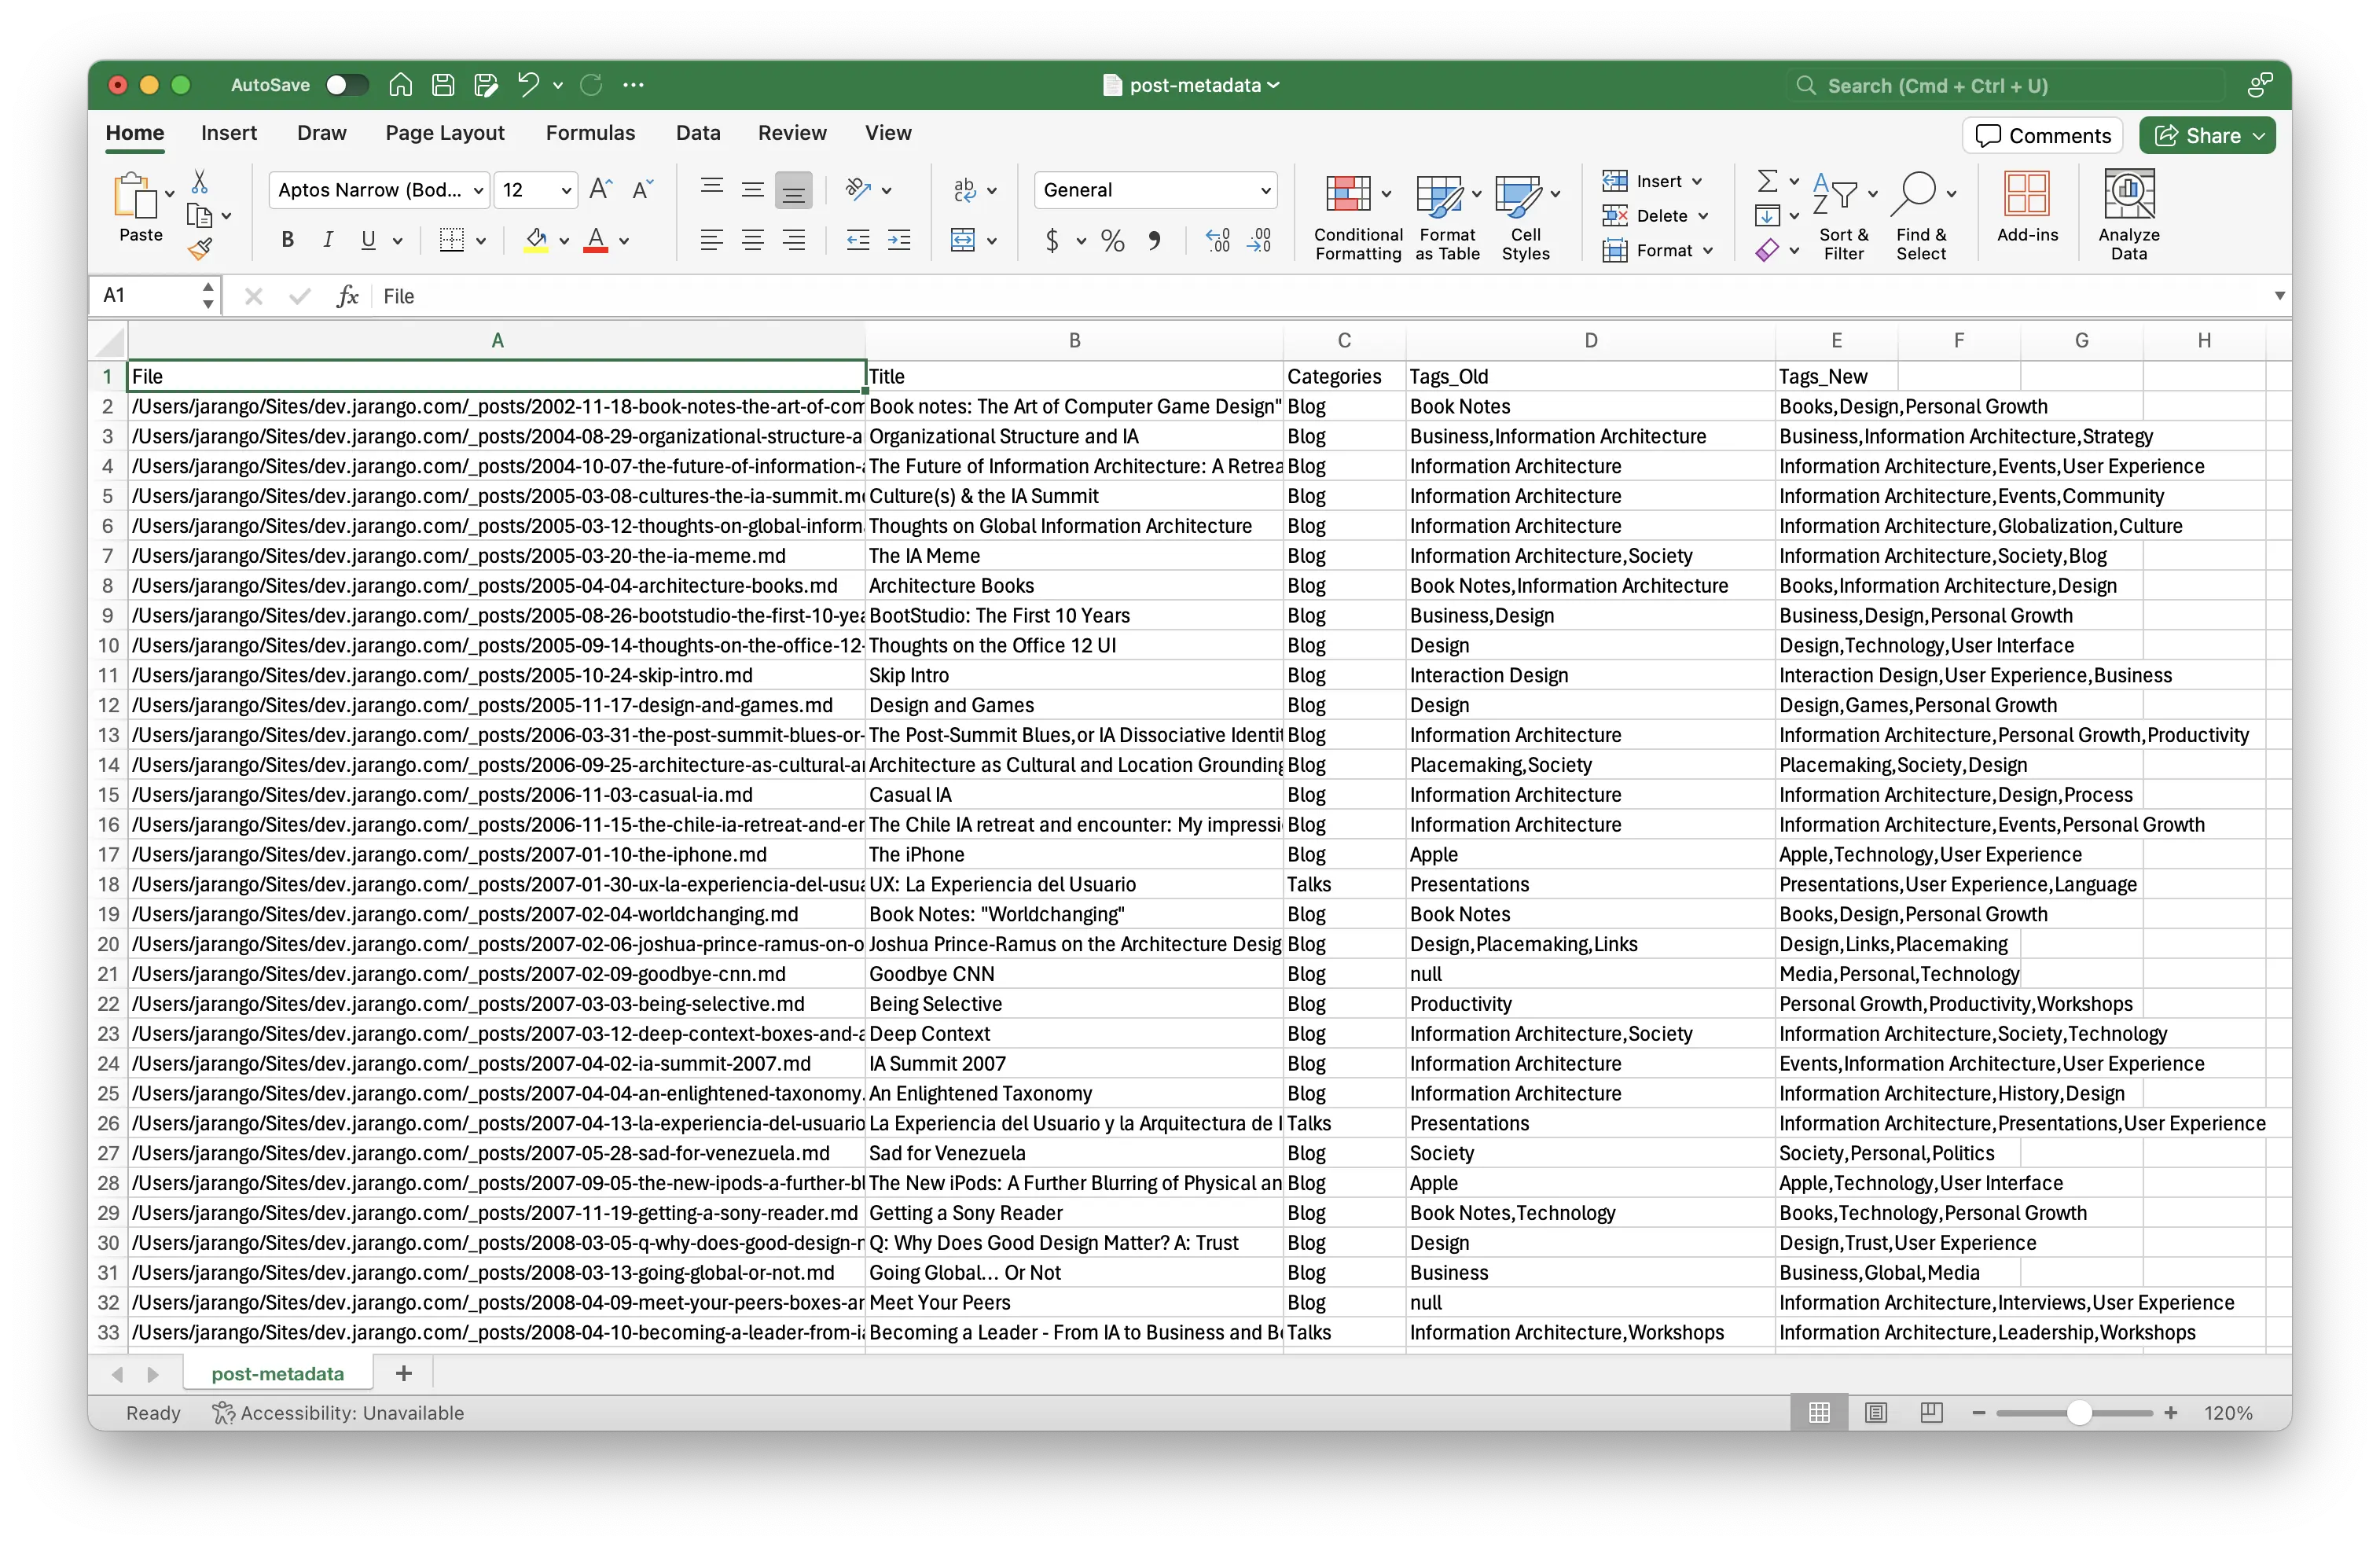 A screenshot showing a Microsoft Excel window with the contents of a CSV file.